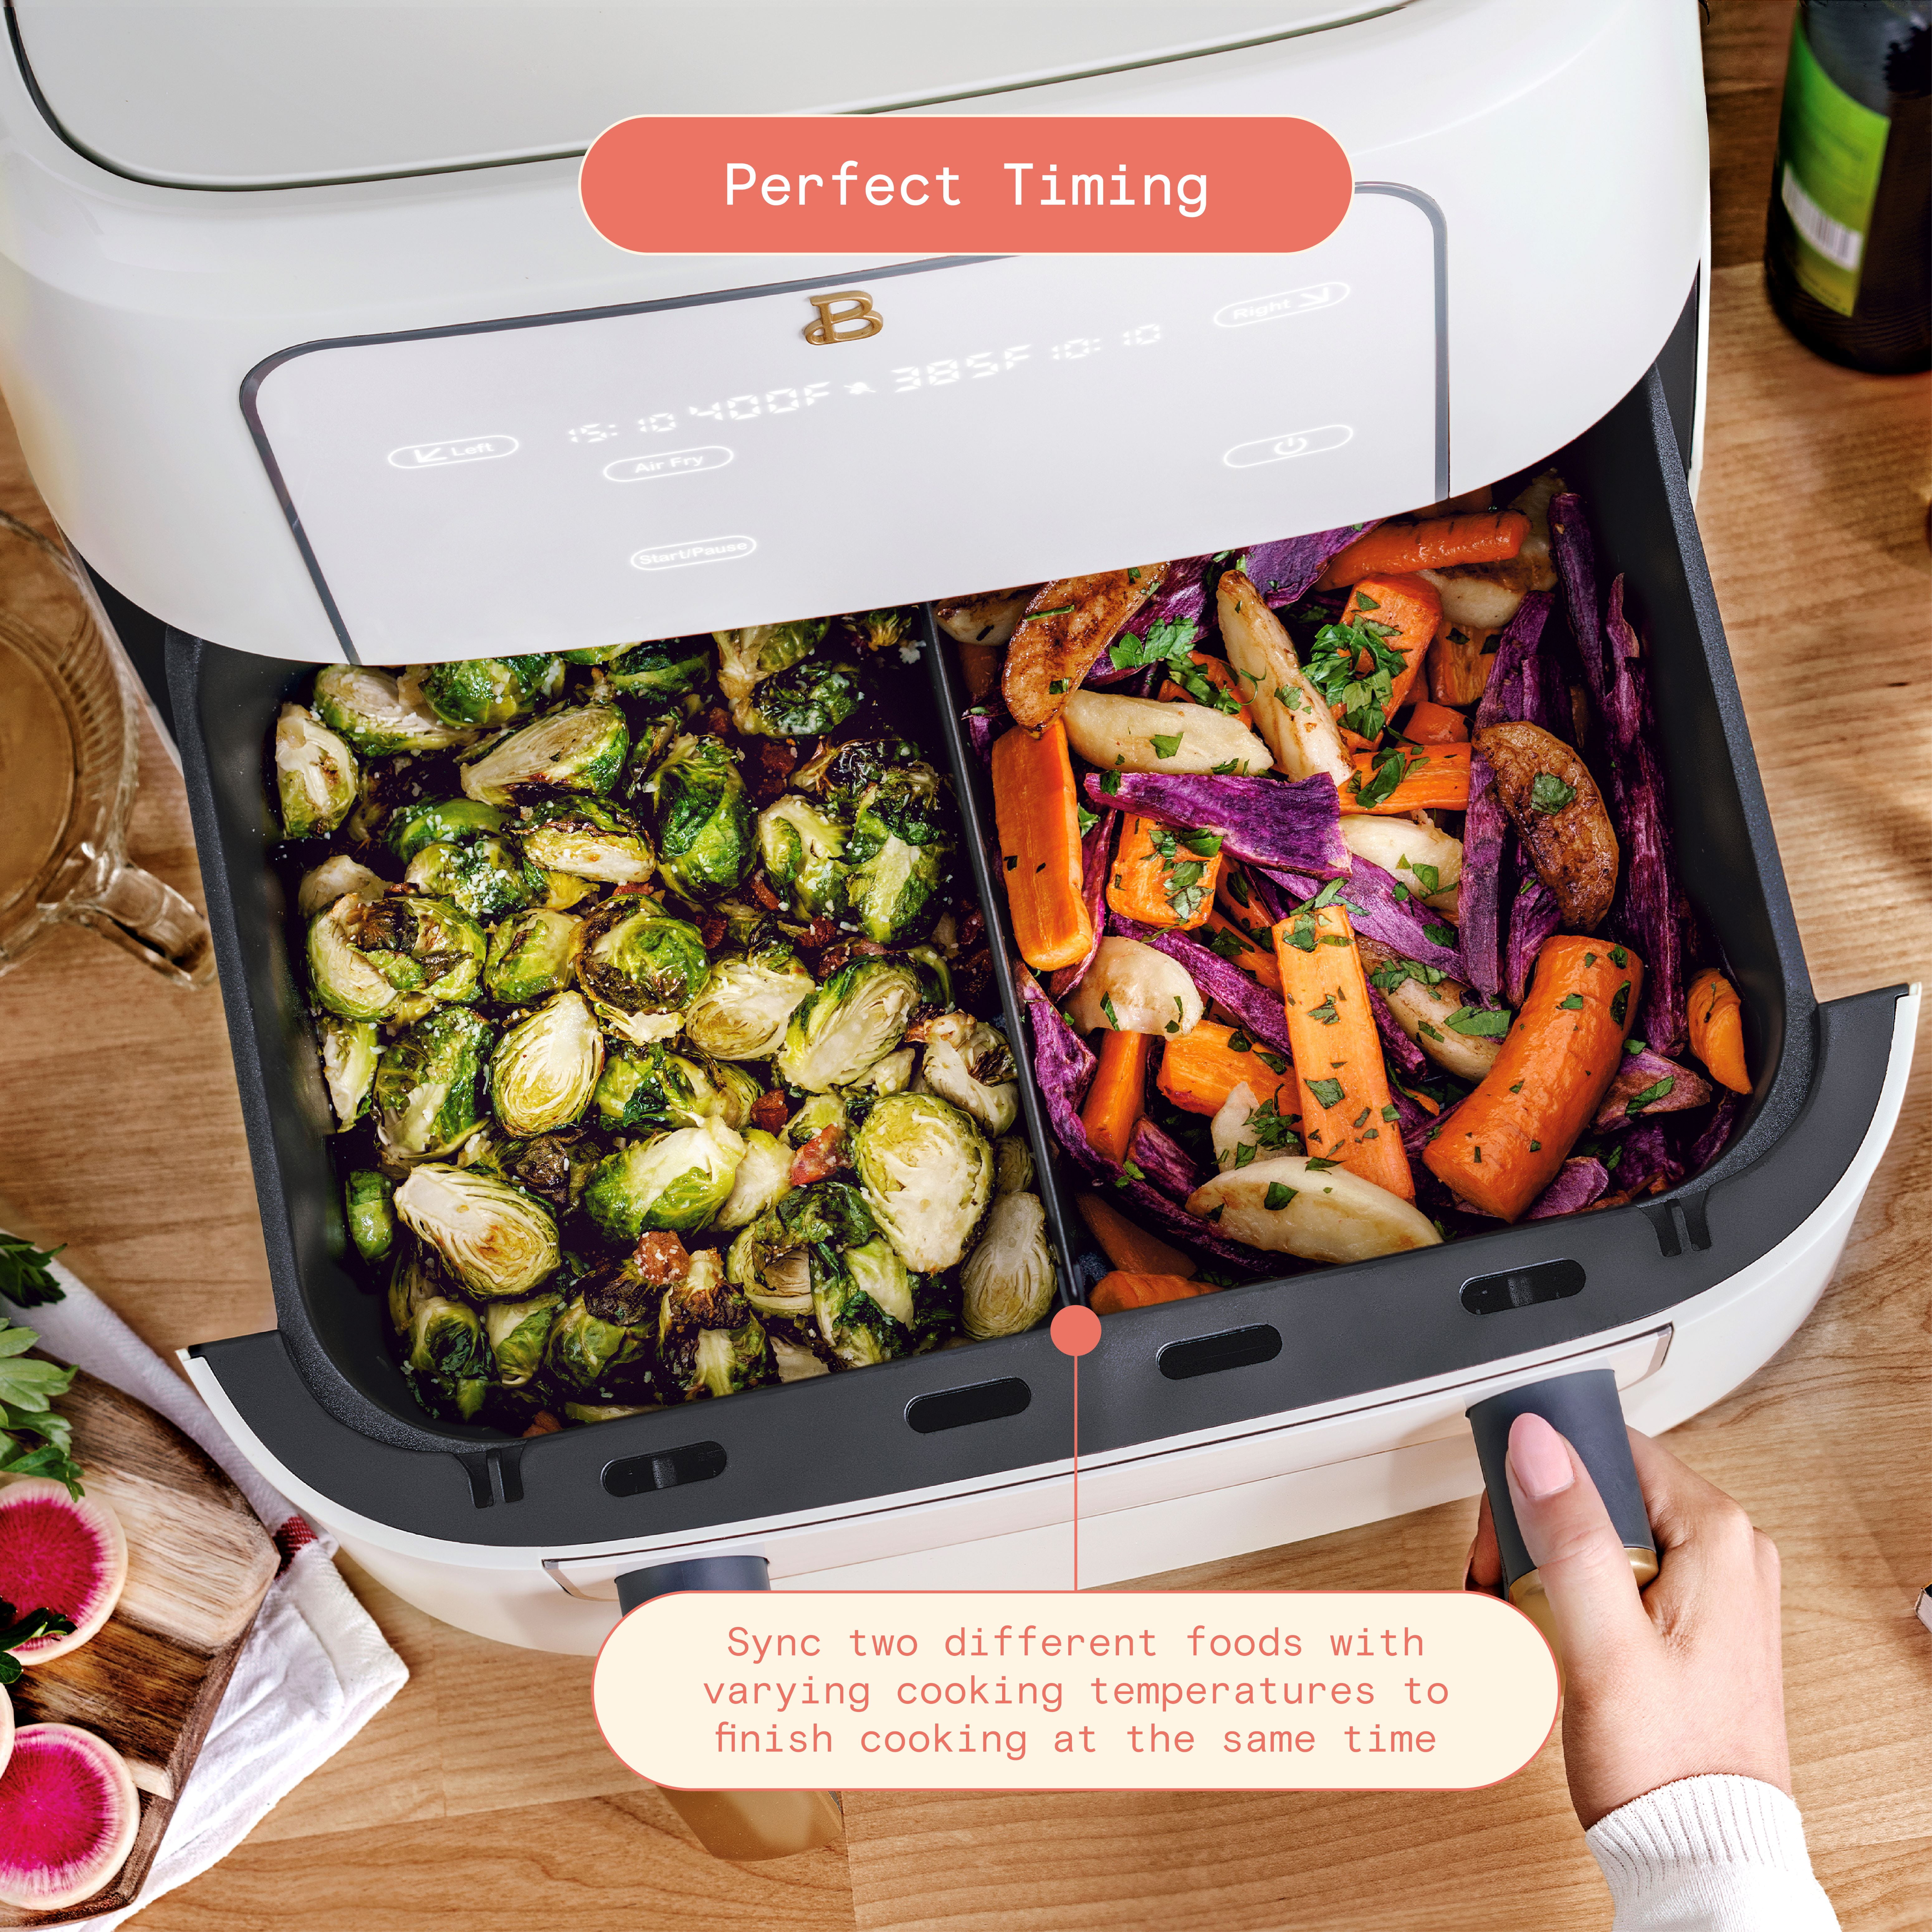 Beautiful 6 Qt Air Fryer with TurboCrisp Technology and Touch-Activated  Display, Black Sesame by Drew Barrymore 